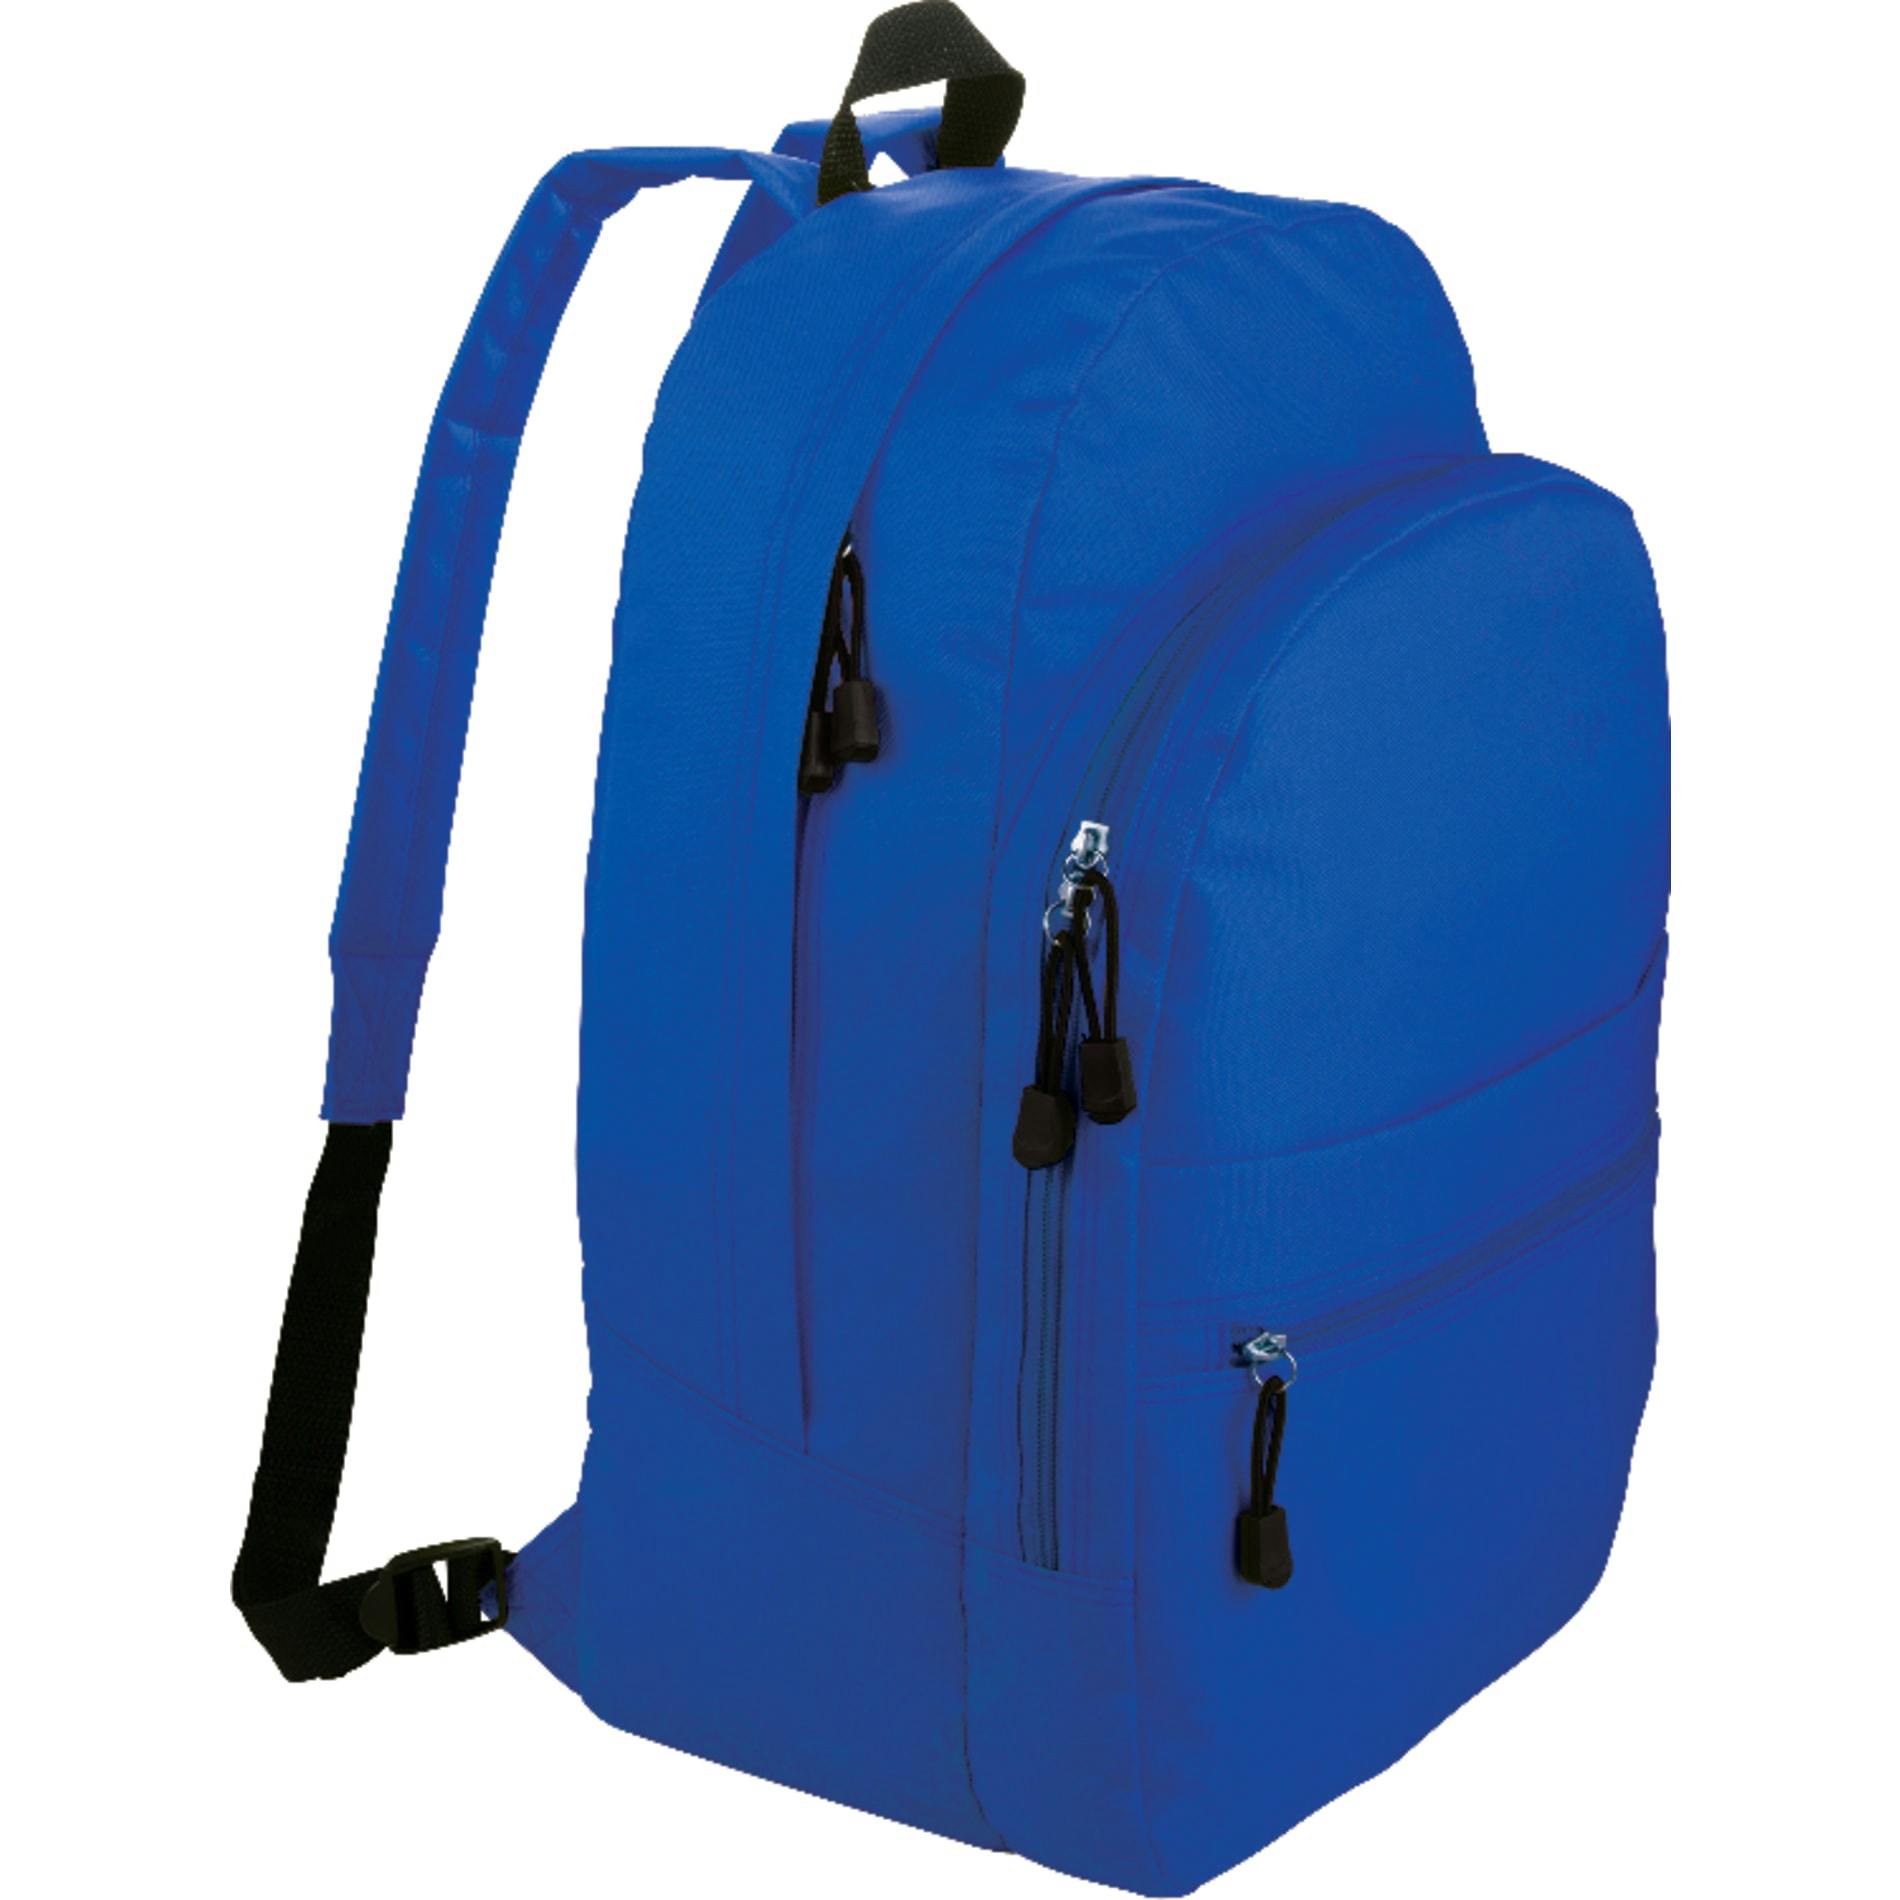 Classic Deluxe Backpack - additional Image 2